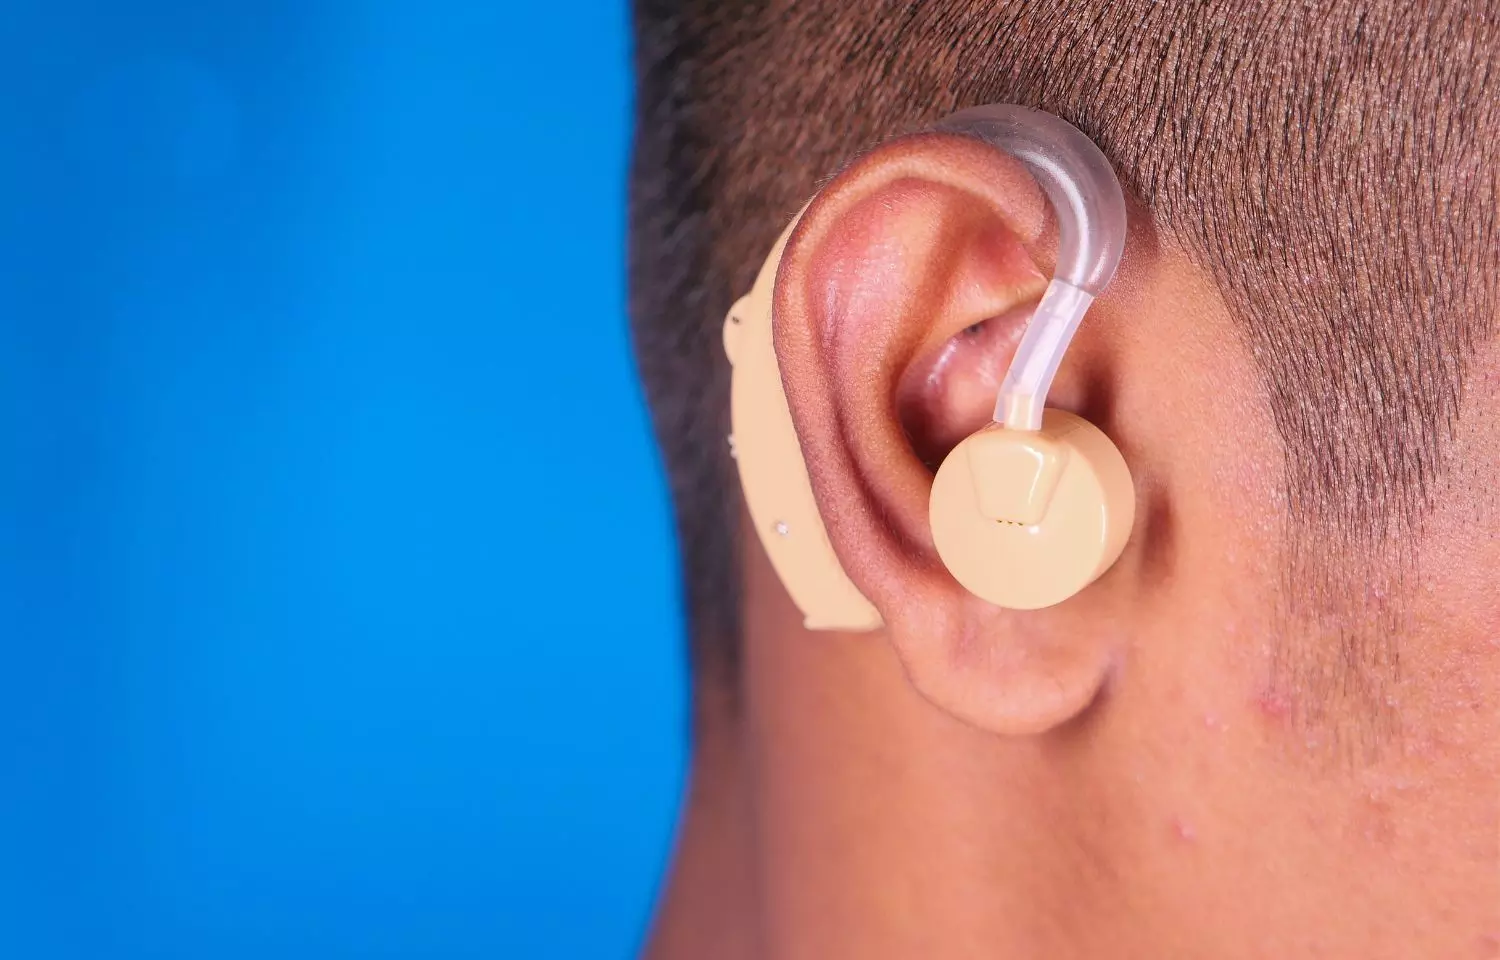 Regular use of hearing aids may lower mortality risk in adults with hearing loss